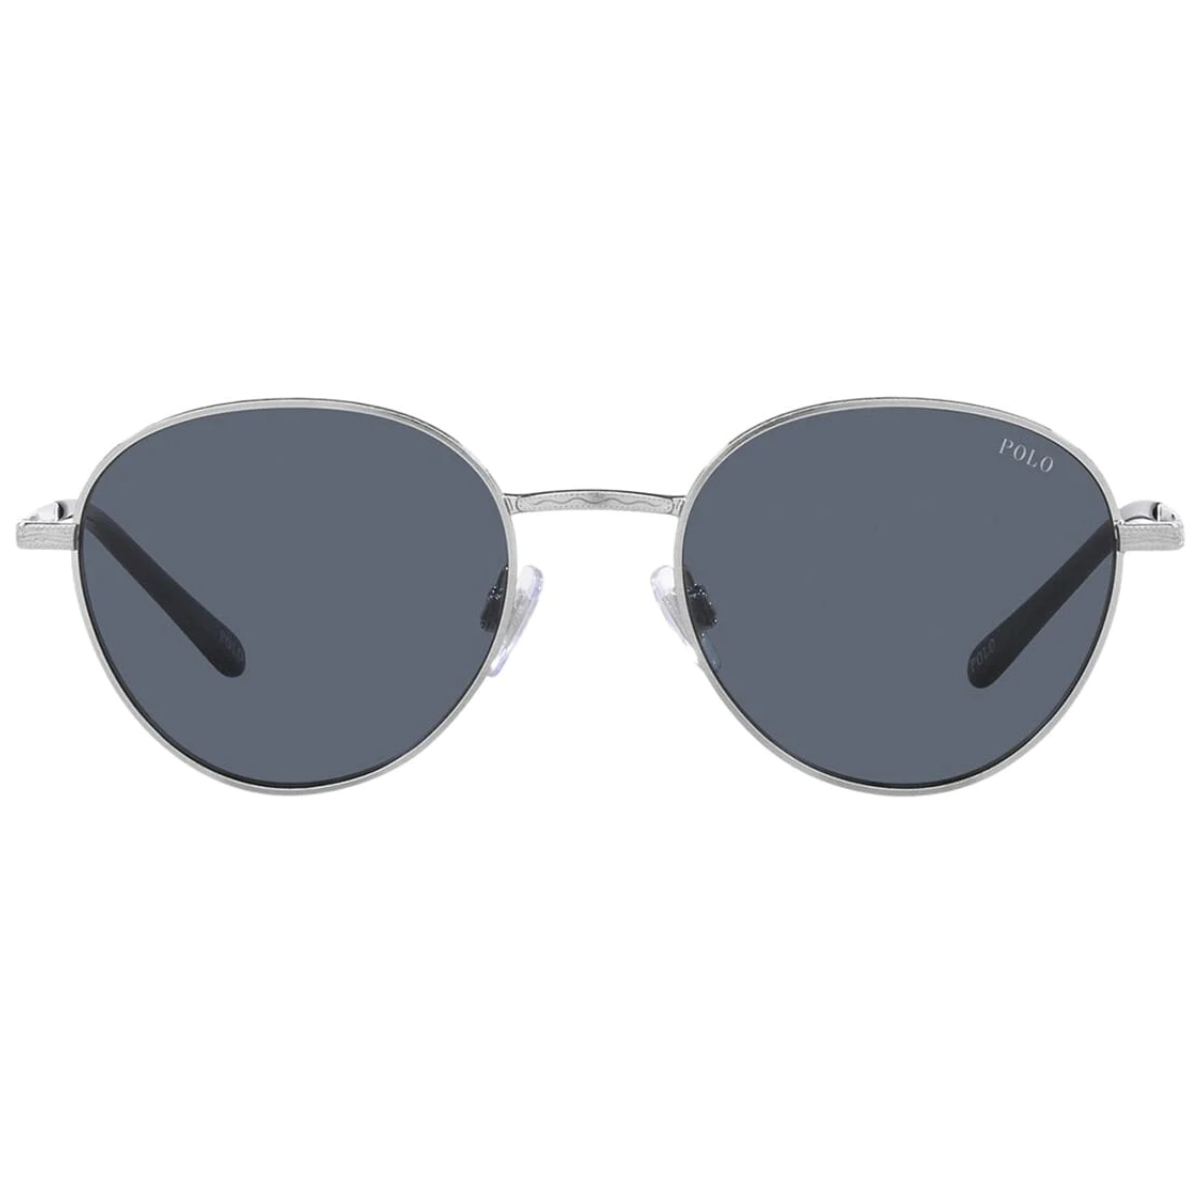 ""Stylish Ralph Lauren Polo 3144 Sunglasses for Men at Optorium. Top brands, square/round shapes, metal frames, dark blue lenses. Stay cool and stylish!""